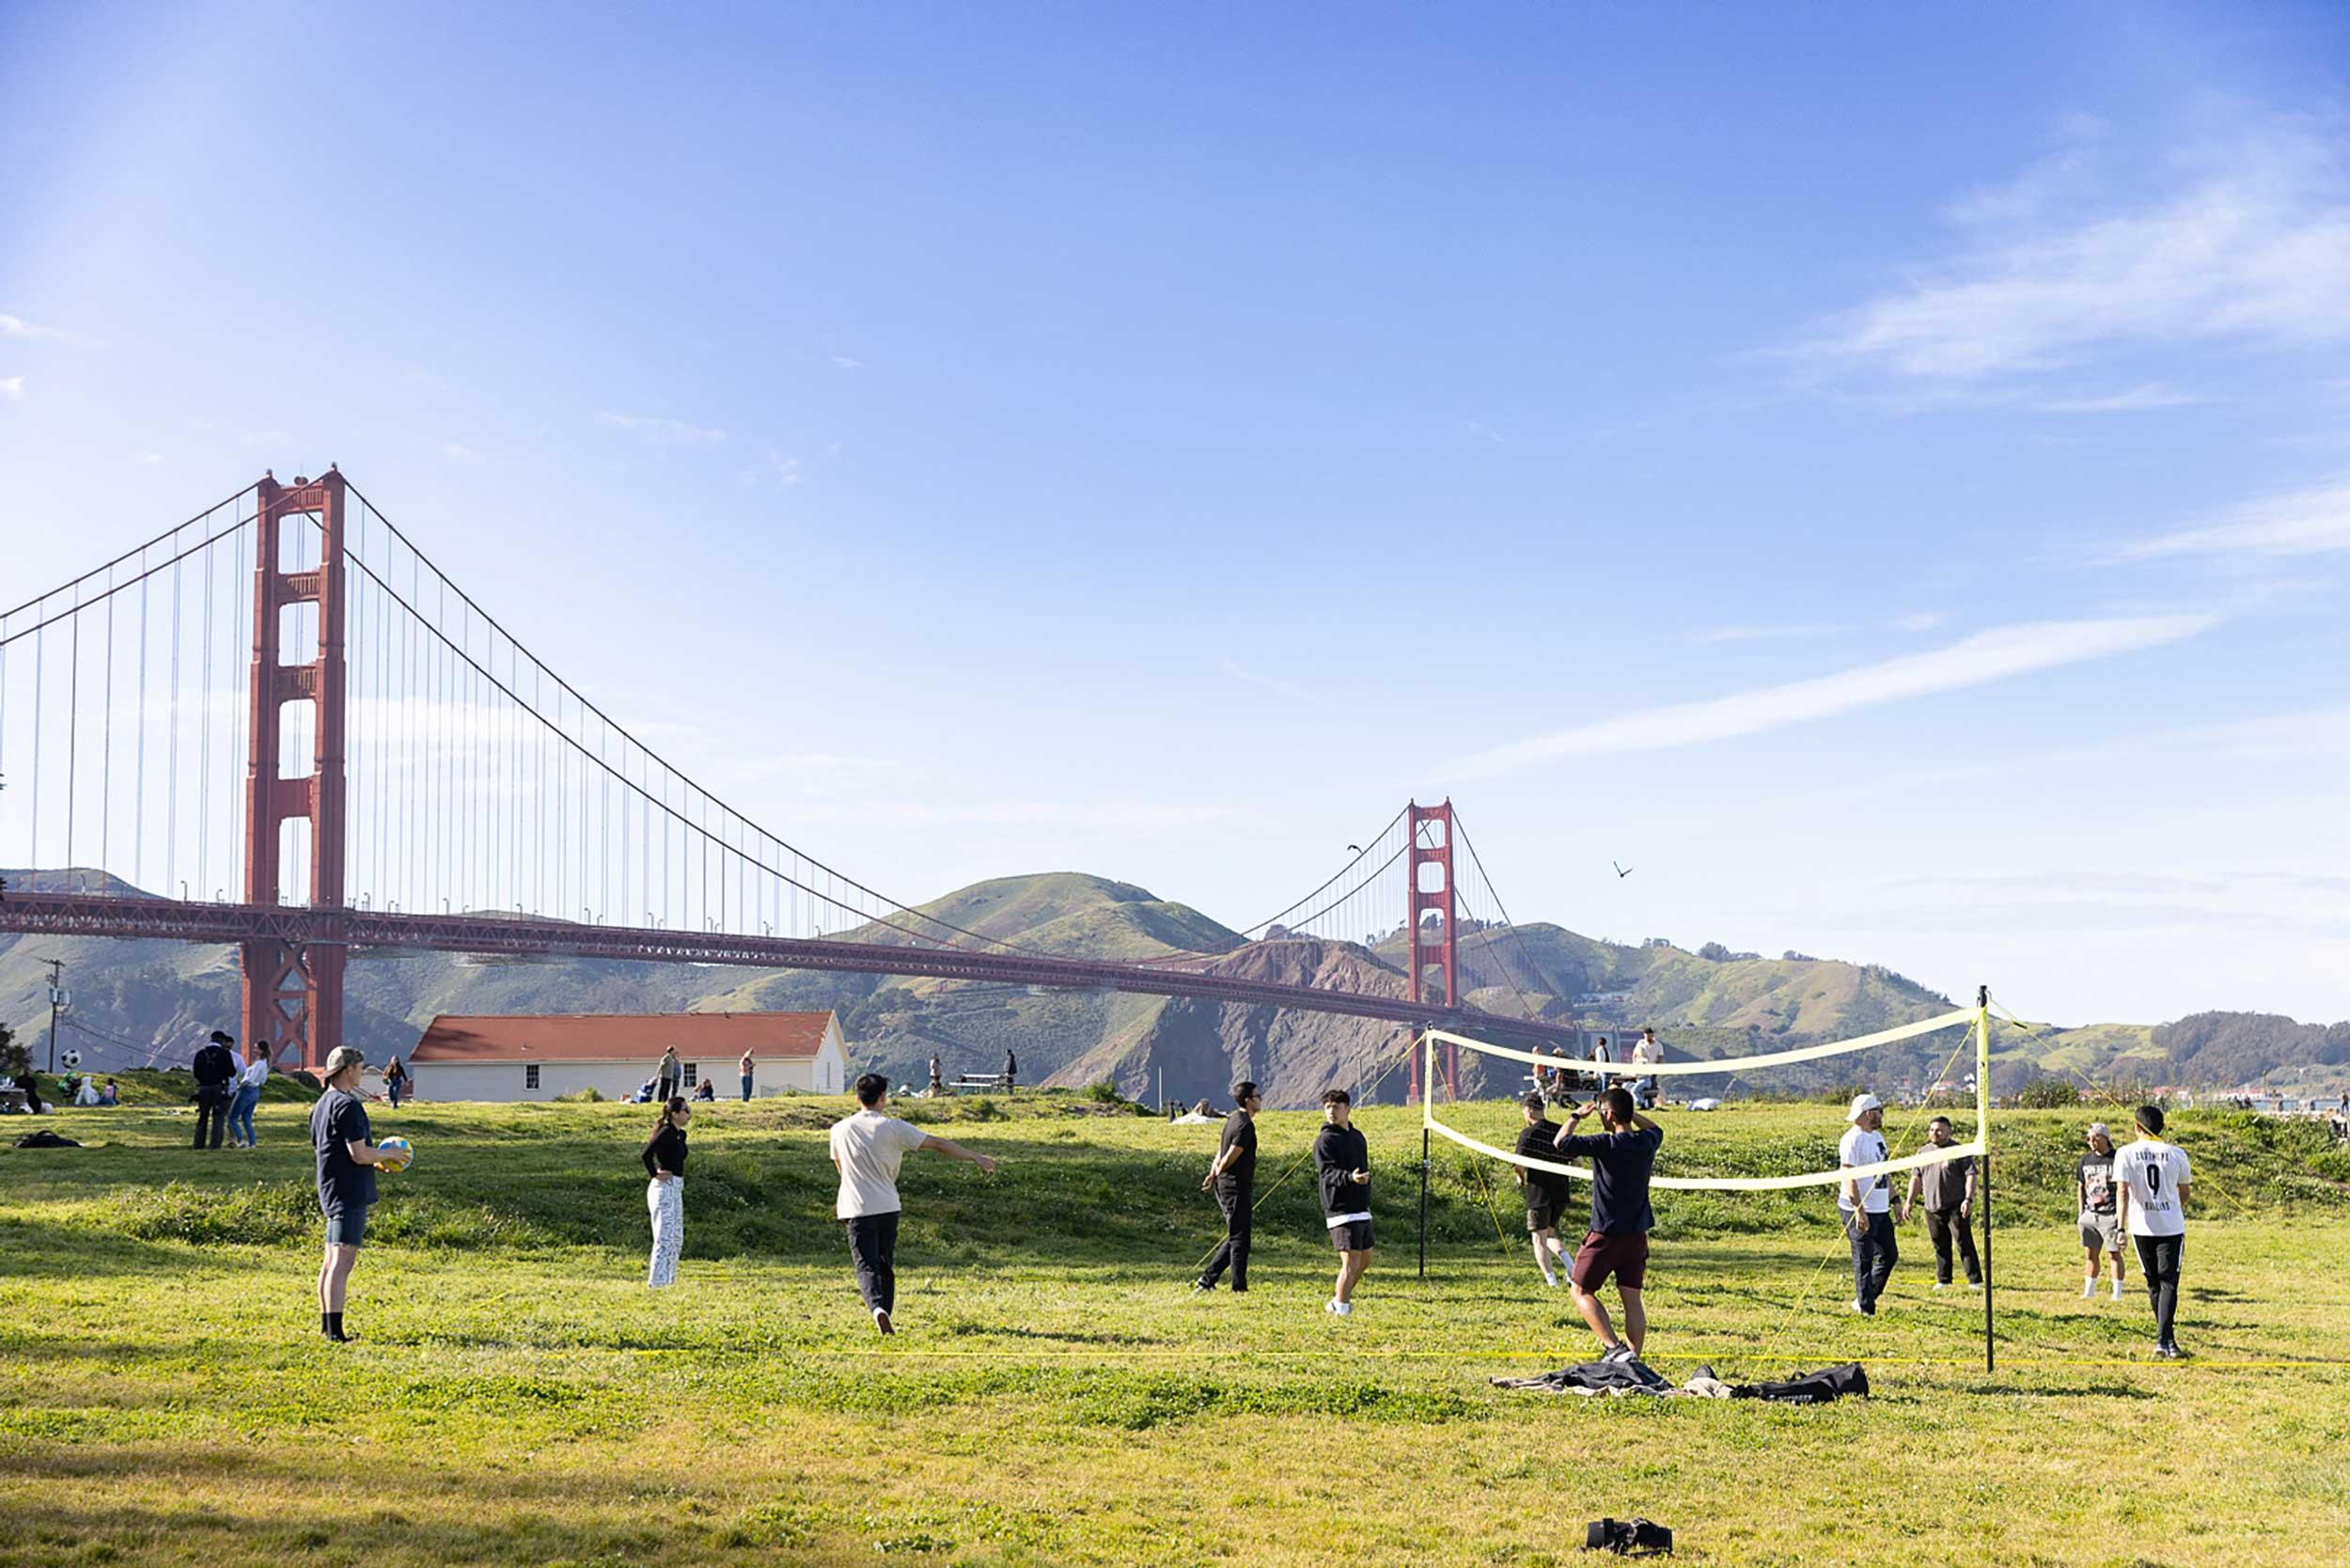 People playing volleyball on the grass at Crissy Field West Bluff with the Golden Gate Bridge in the background Photo by Myleen Hollero.